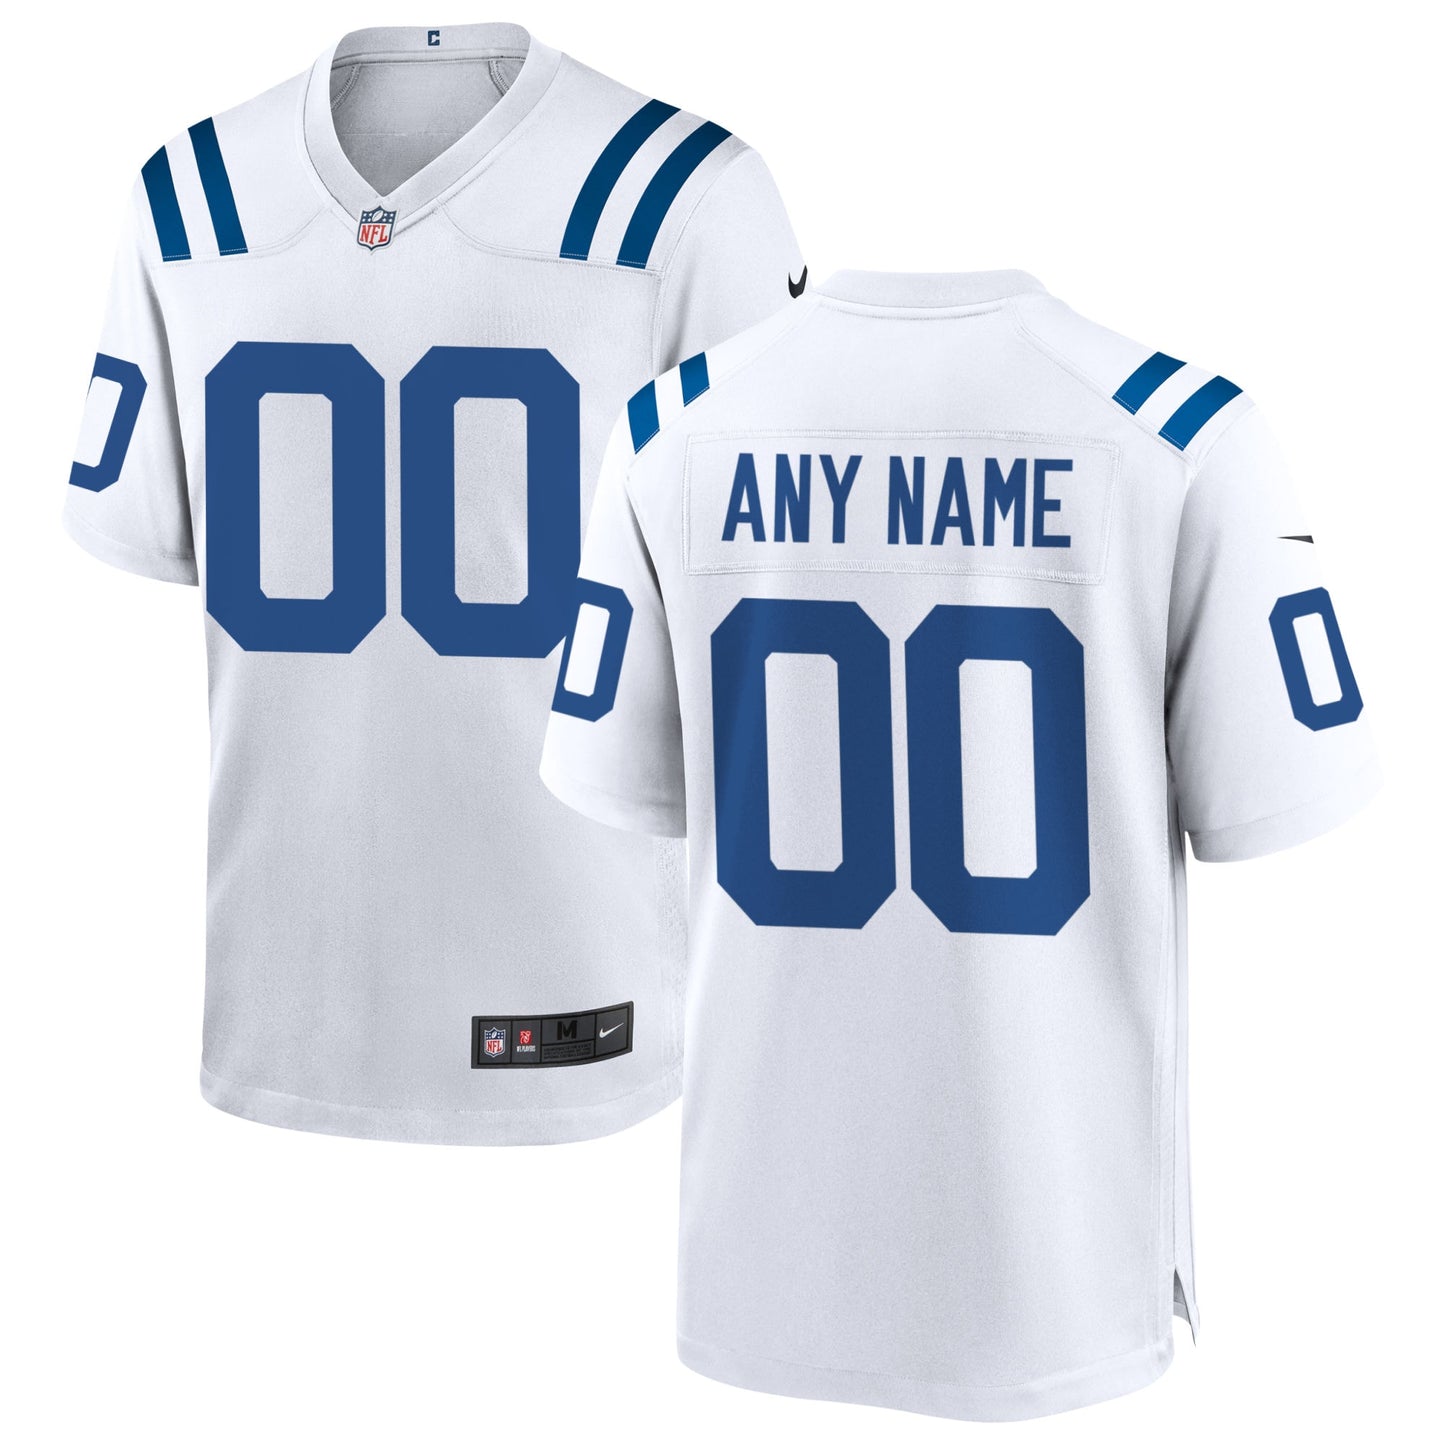 Indianapolis Colts Nike Custom Game Jersey - White